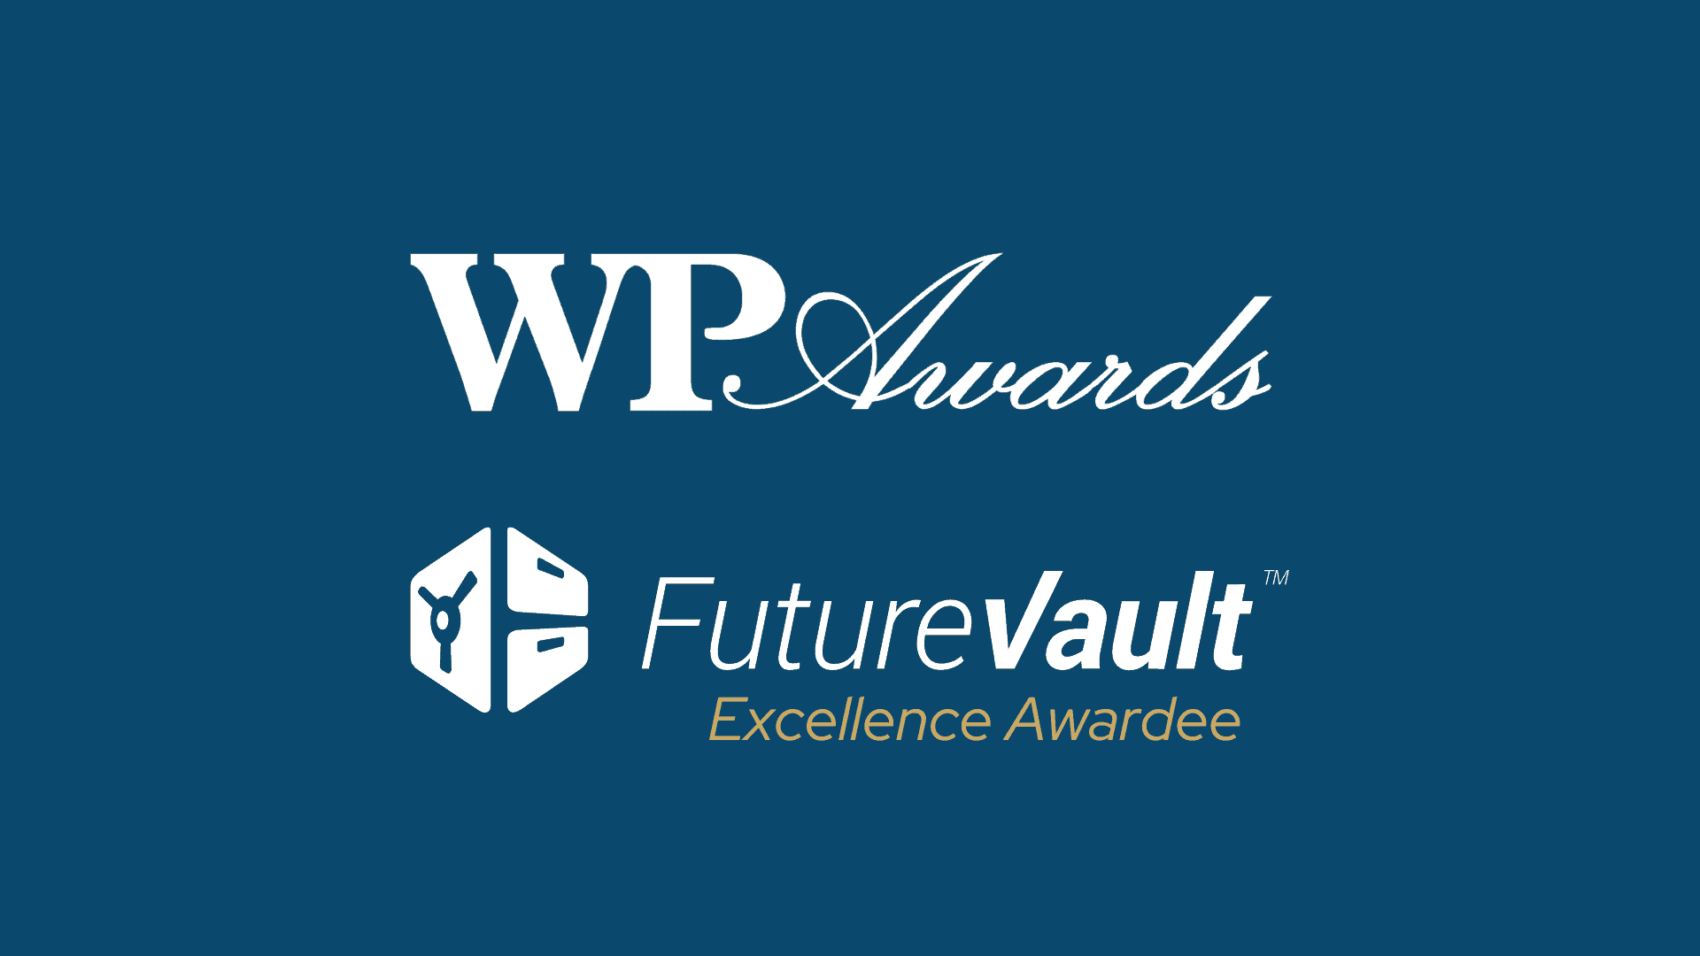 FutureVault Named Excellence Awardee for WealthTech Service Provider of the Year